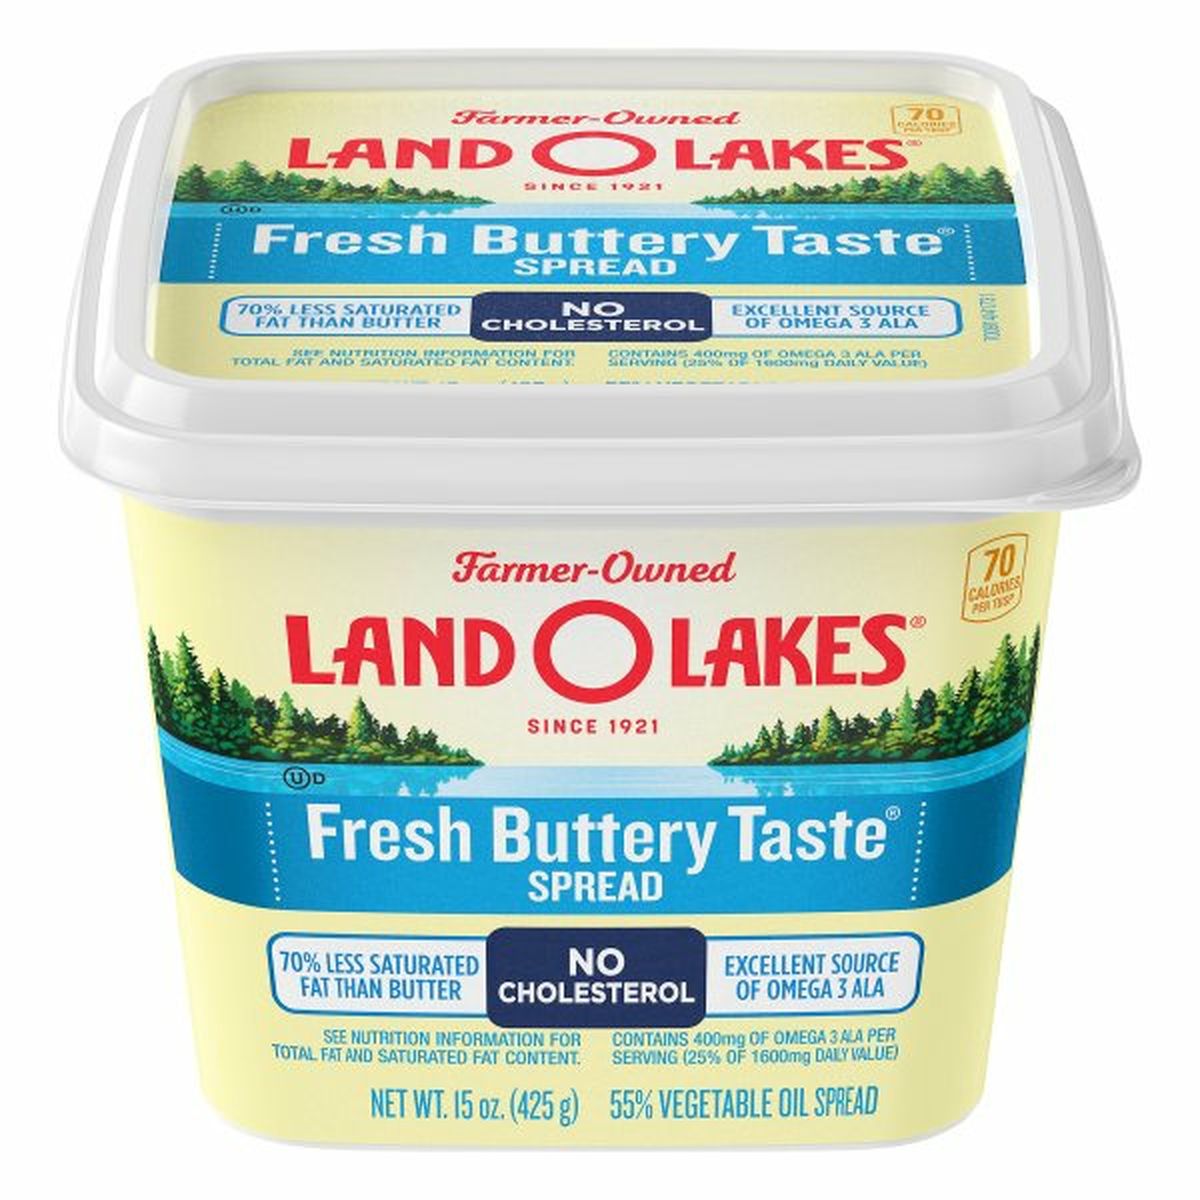 Calories in Land O Lakes Fresh Buttery Taste Spread